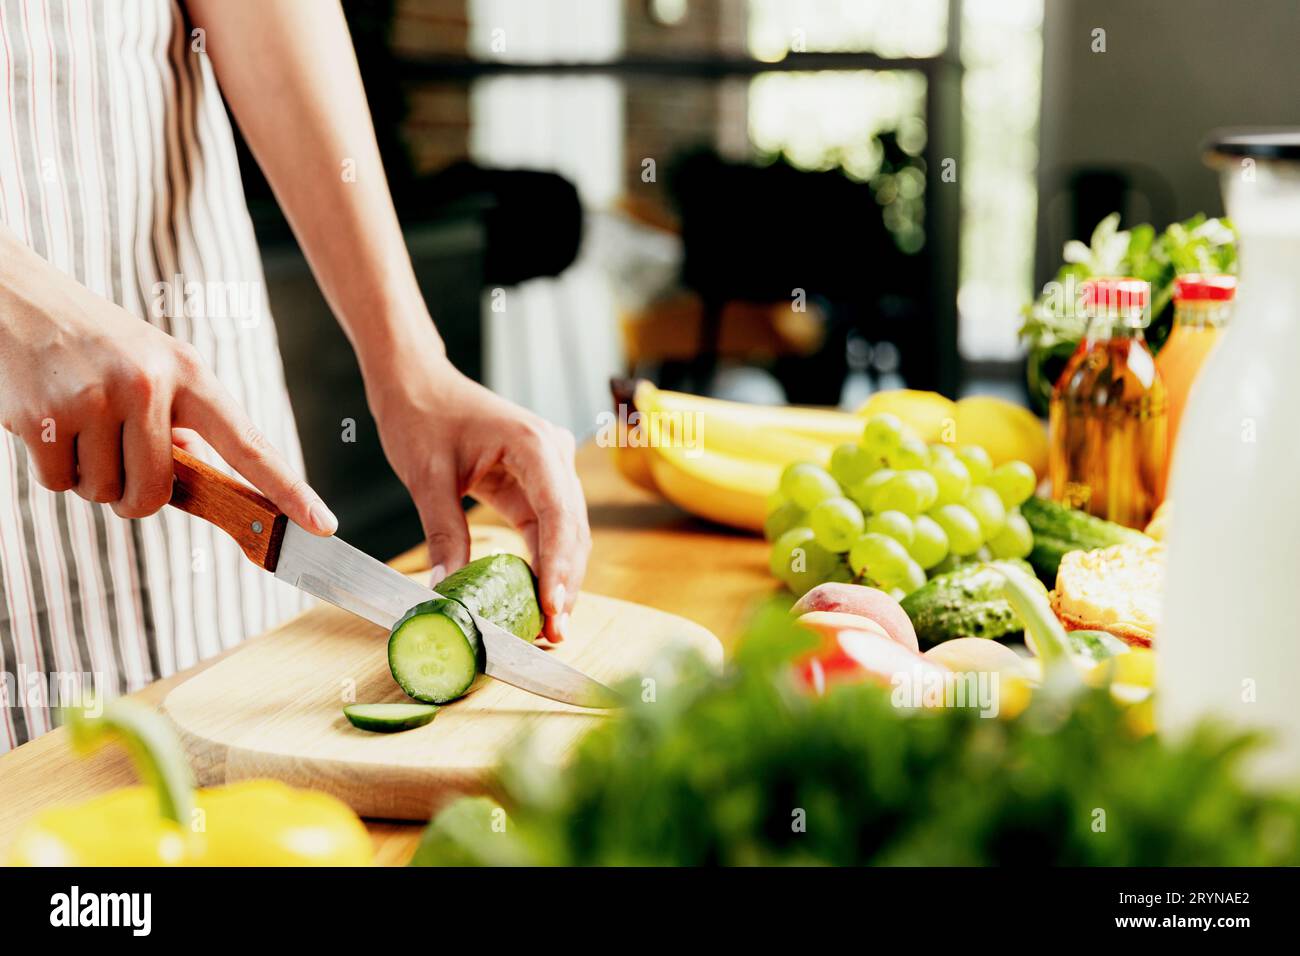 Female hand holding a cucumber with a spiral knife